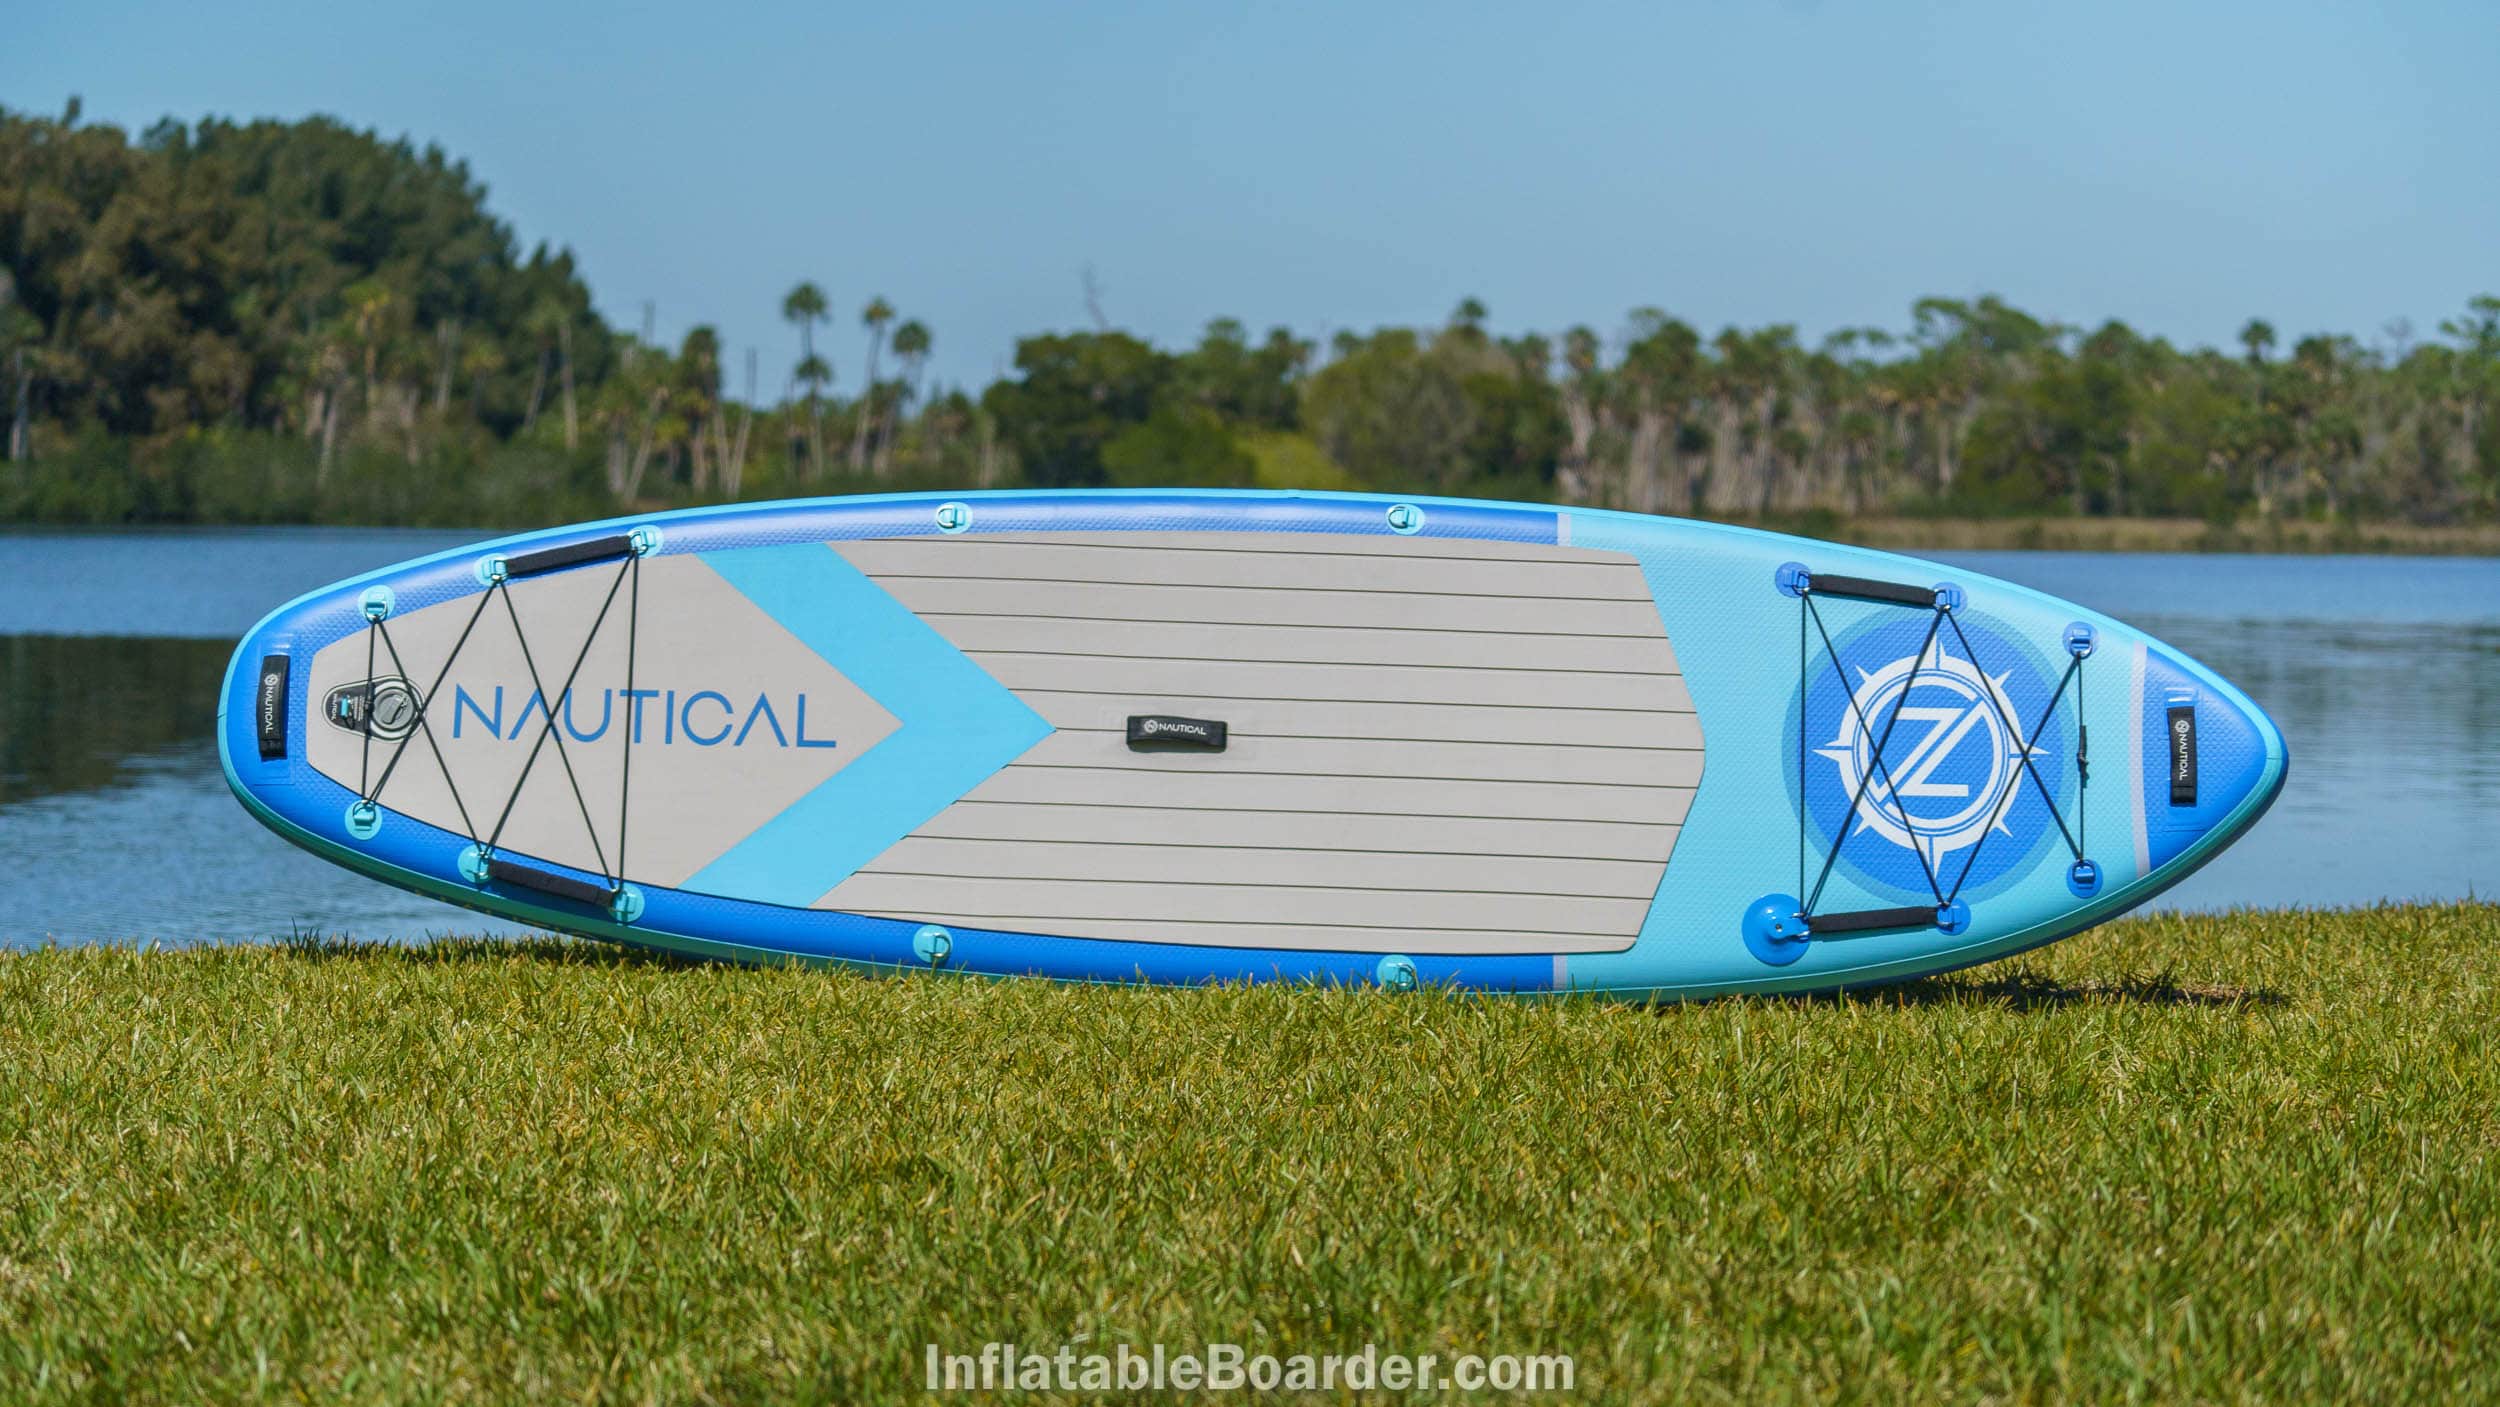 2021 NAUTICAL 10'6" board overview in blue color.